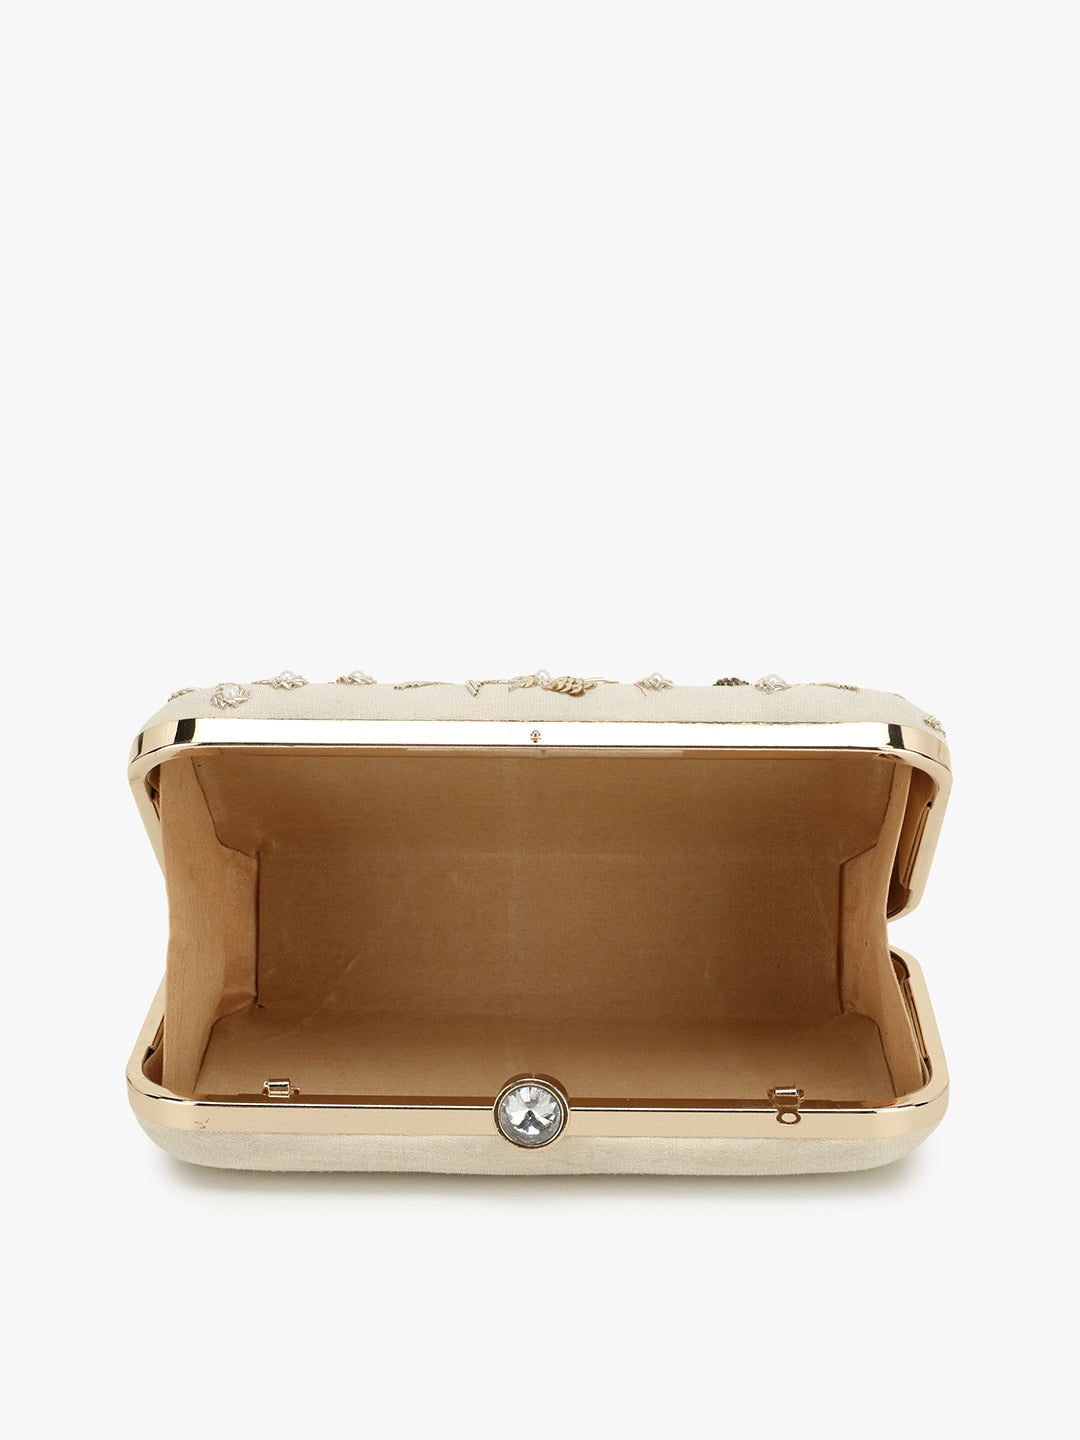 Anekaant Off White & Gold-Toned Embellished Box Clutch - Distacart